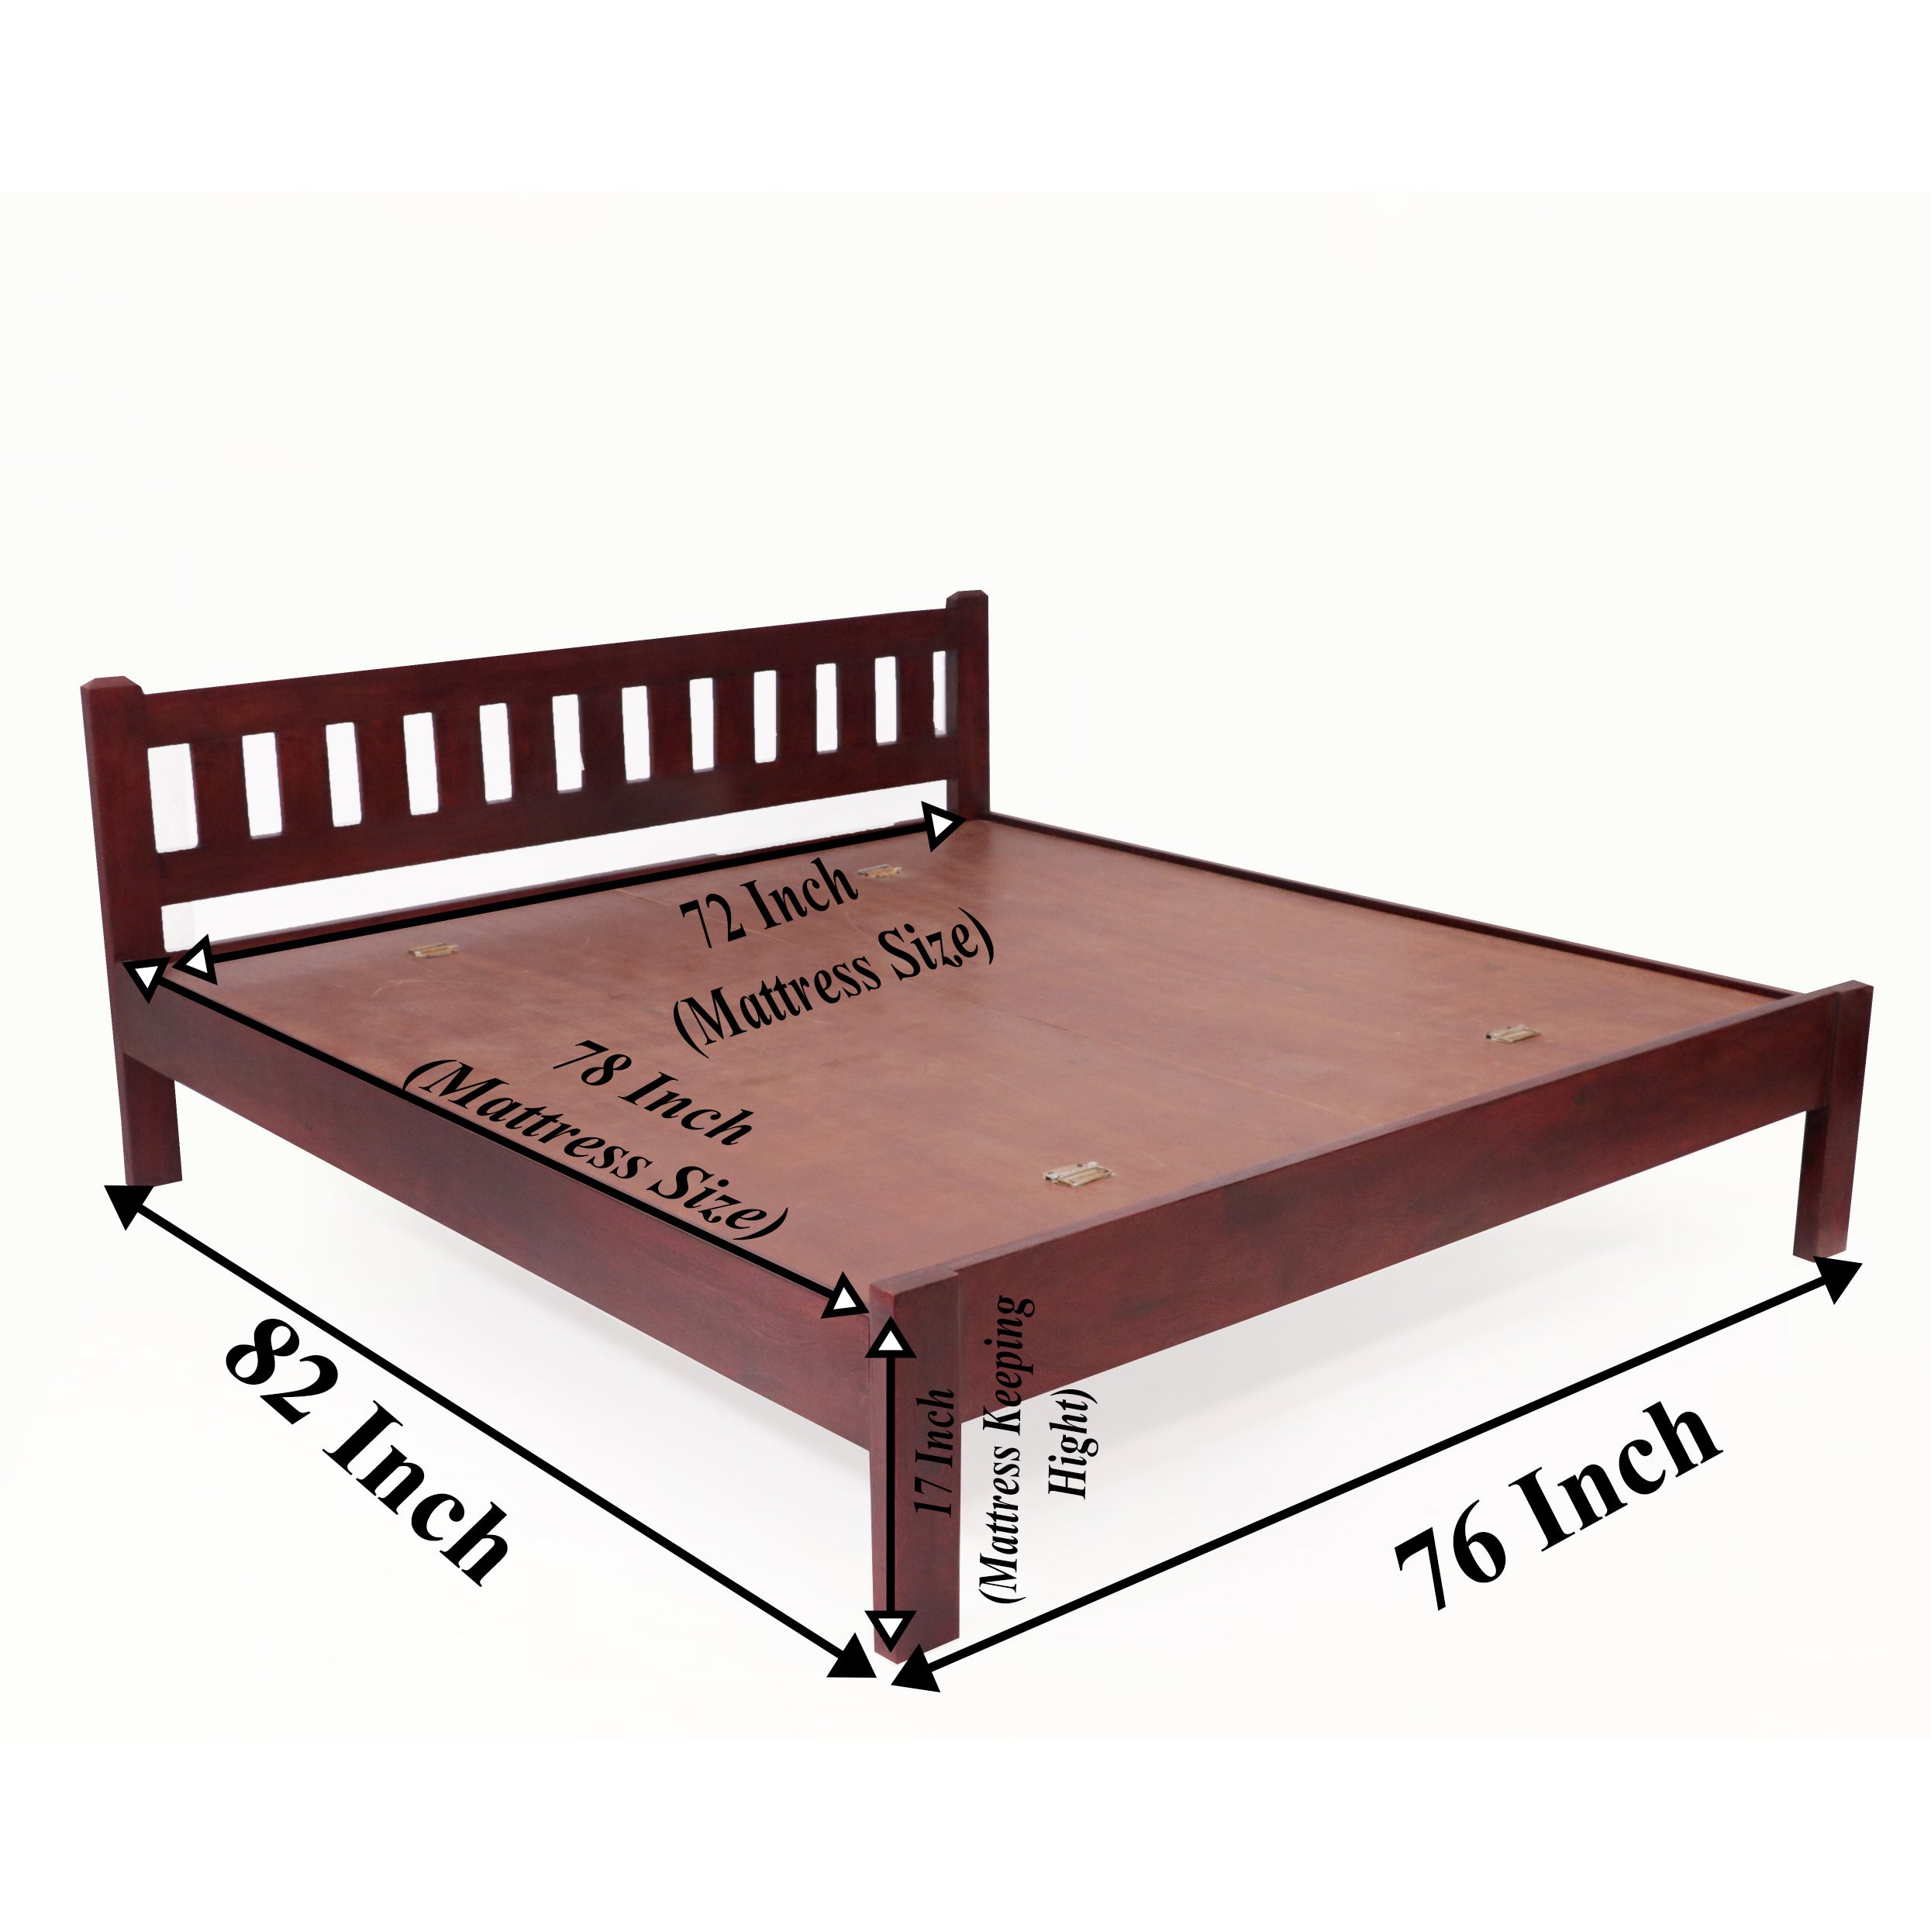 Teak Wood Contemporary Bed Bed